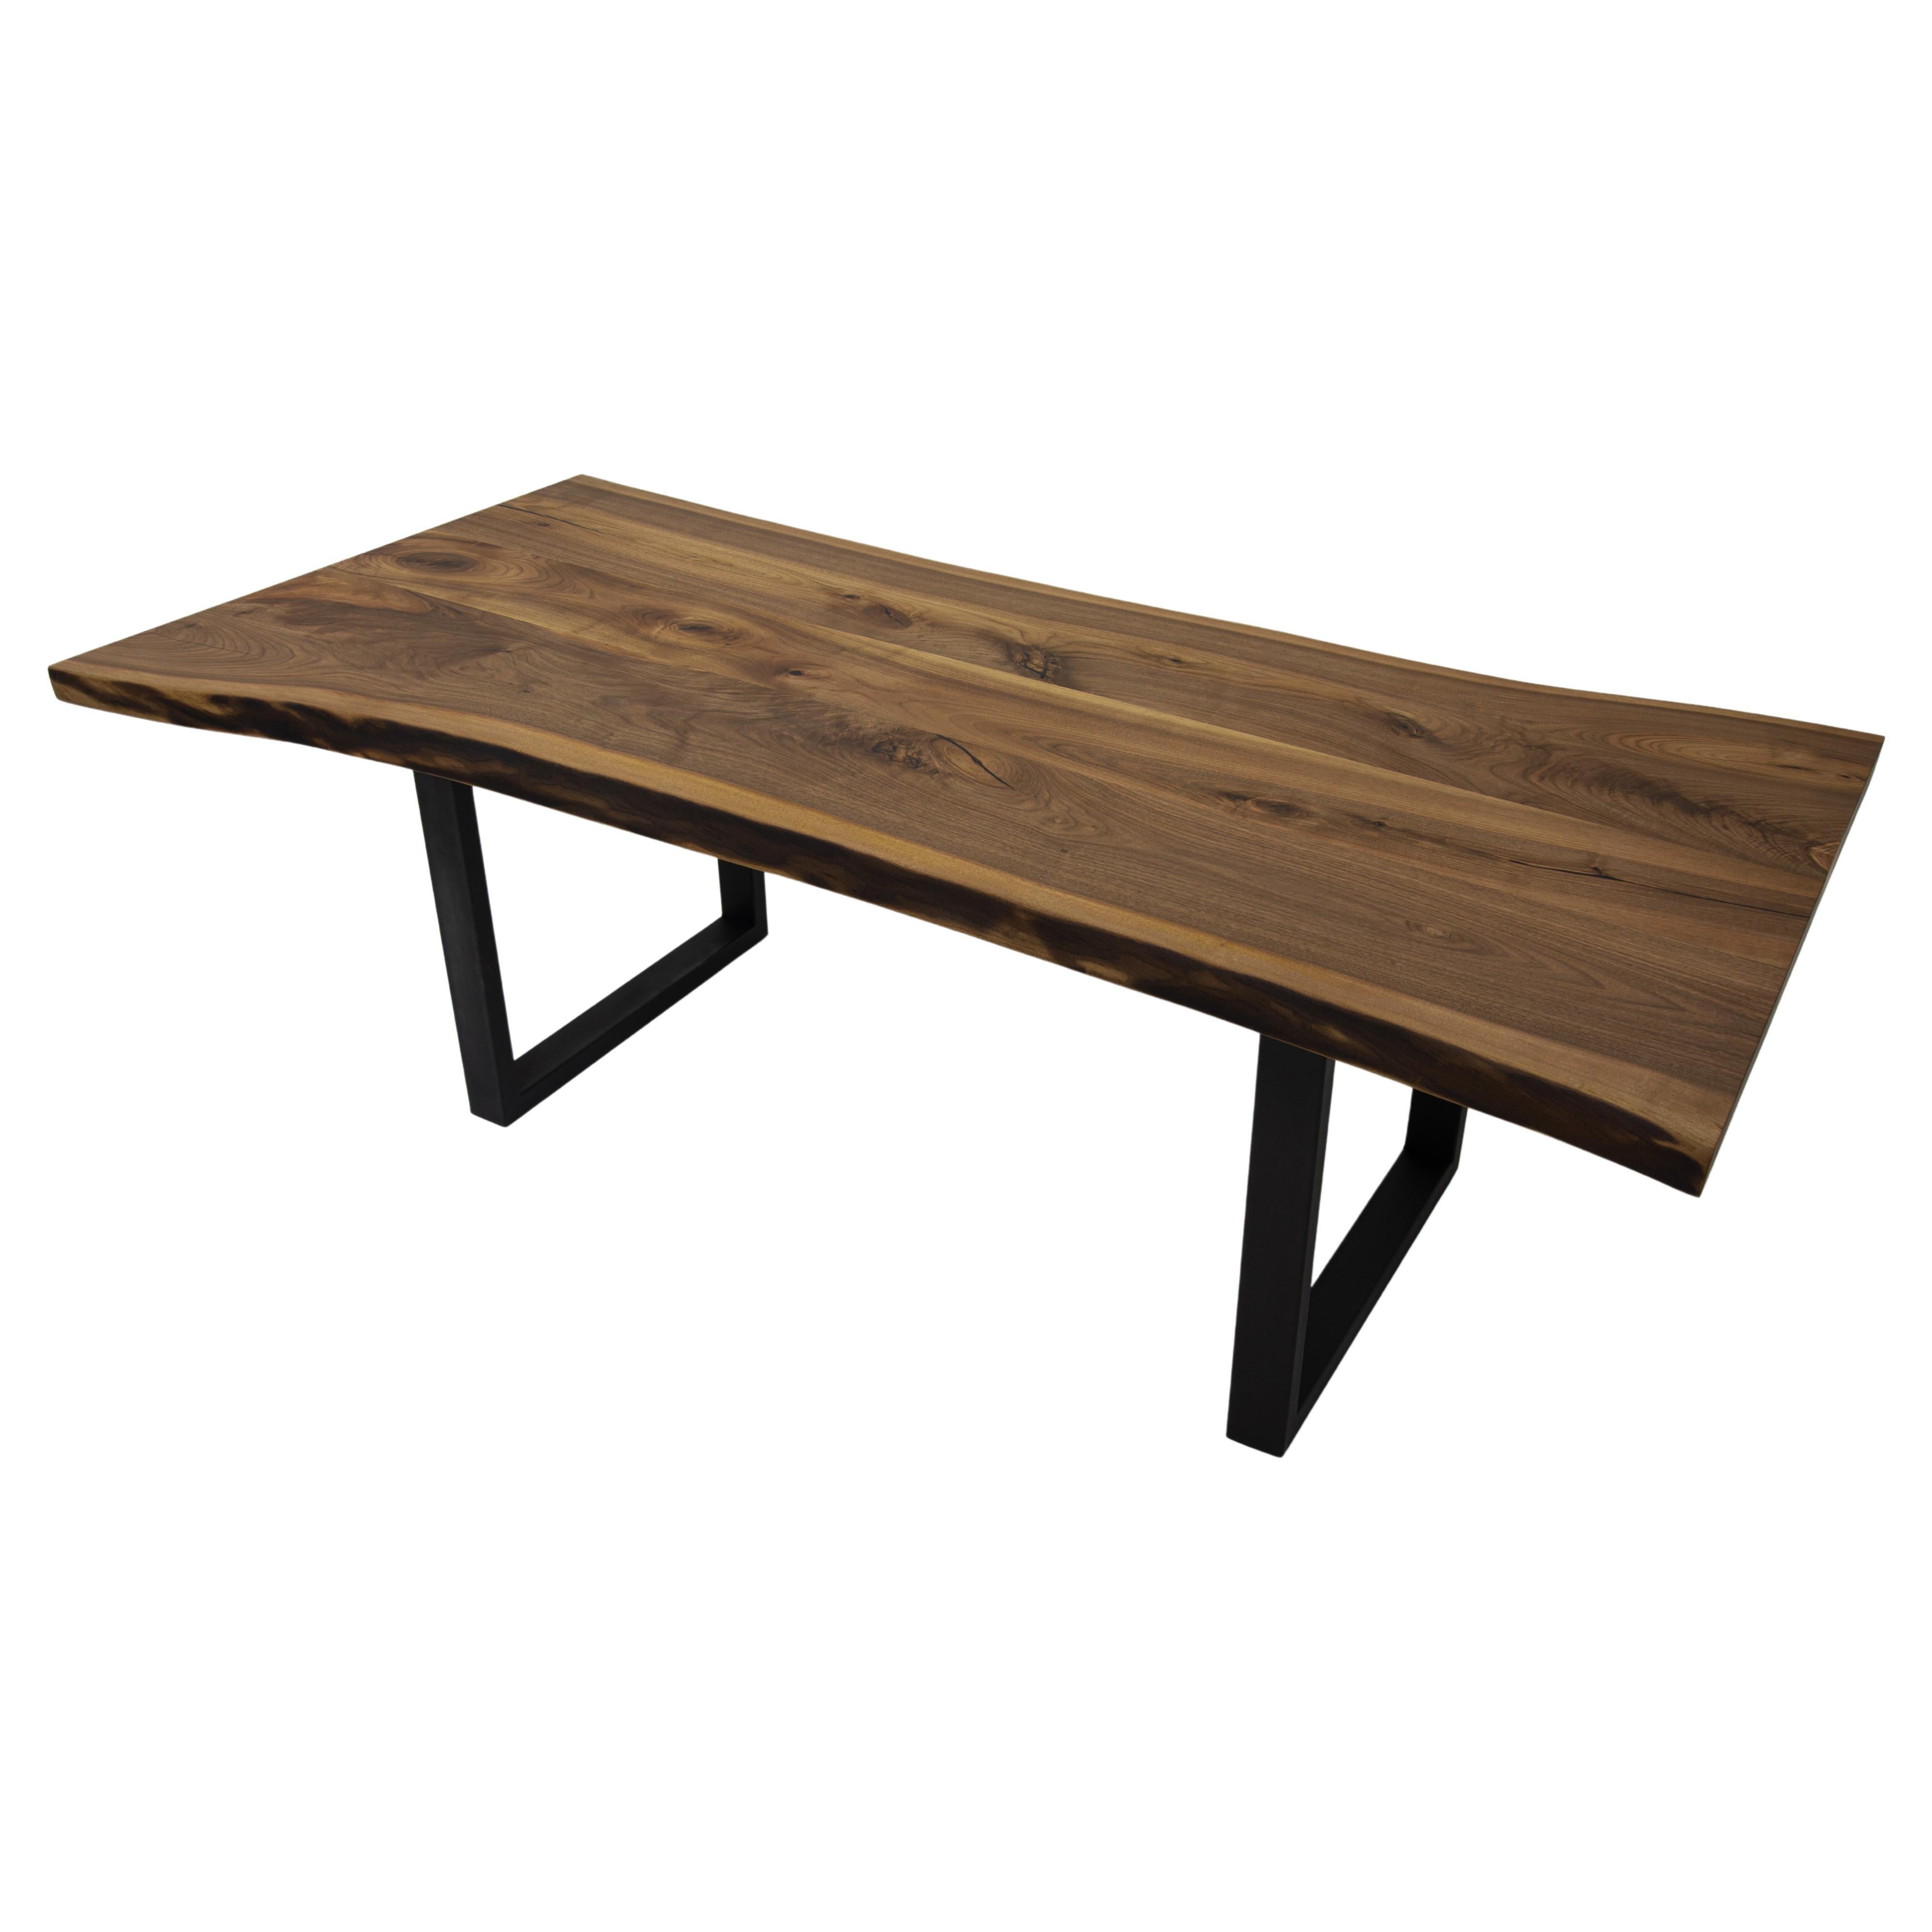 Live Edge Solid Walnut Wood Dining Table